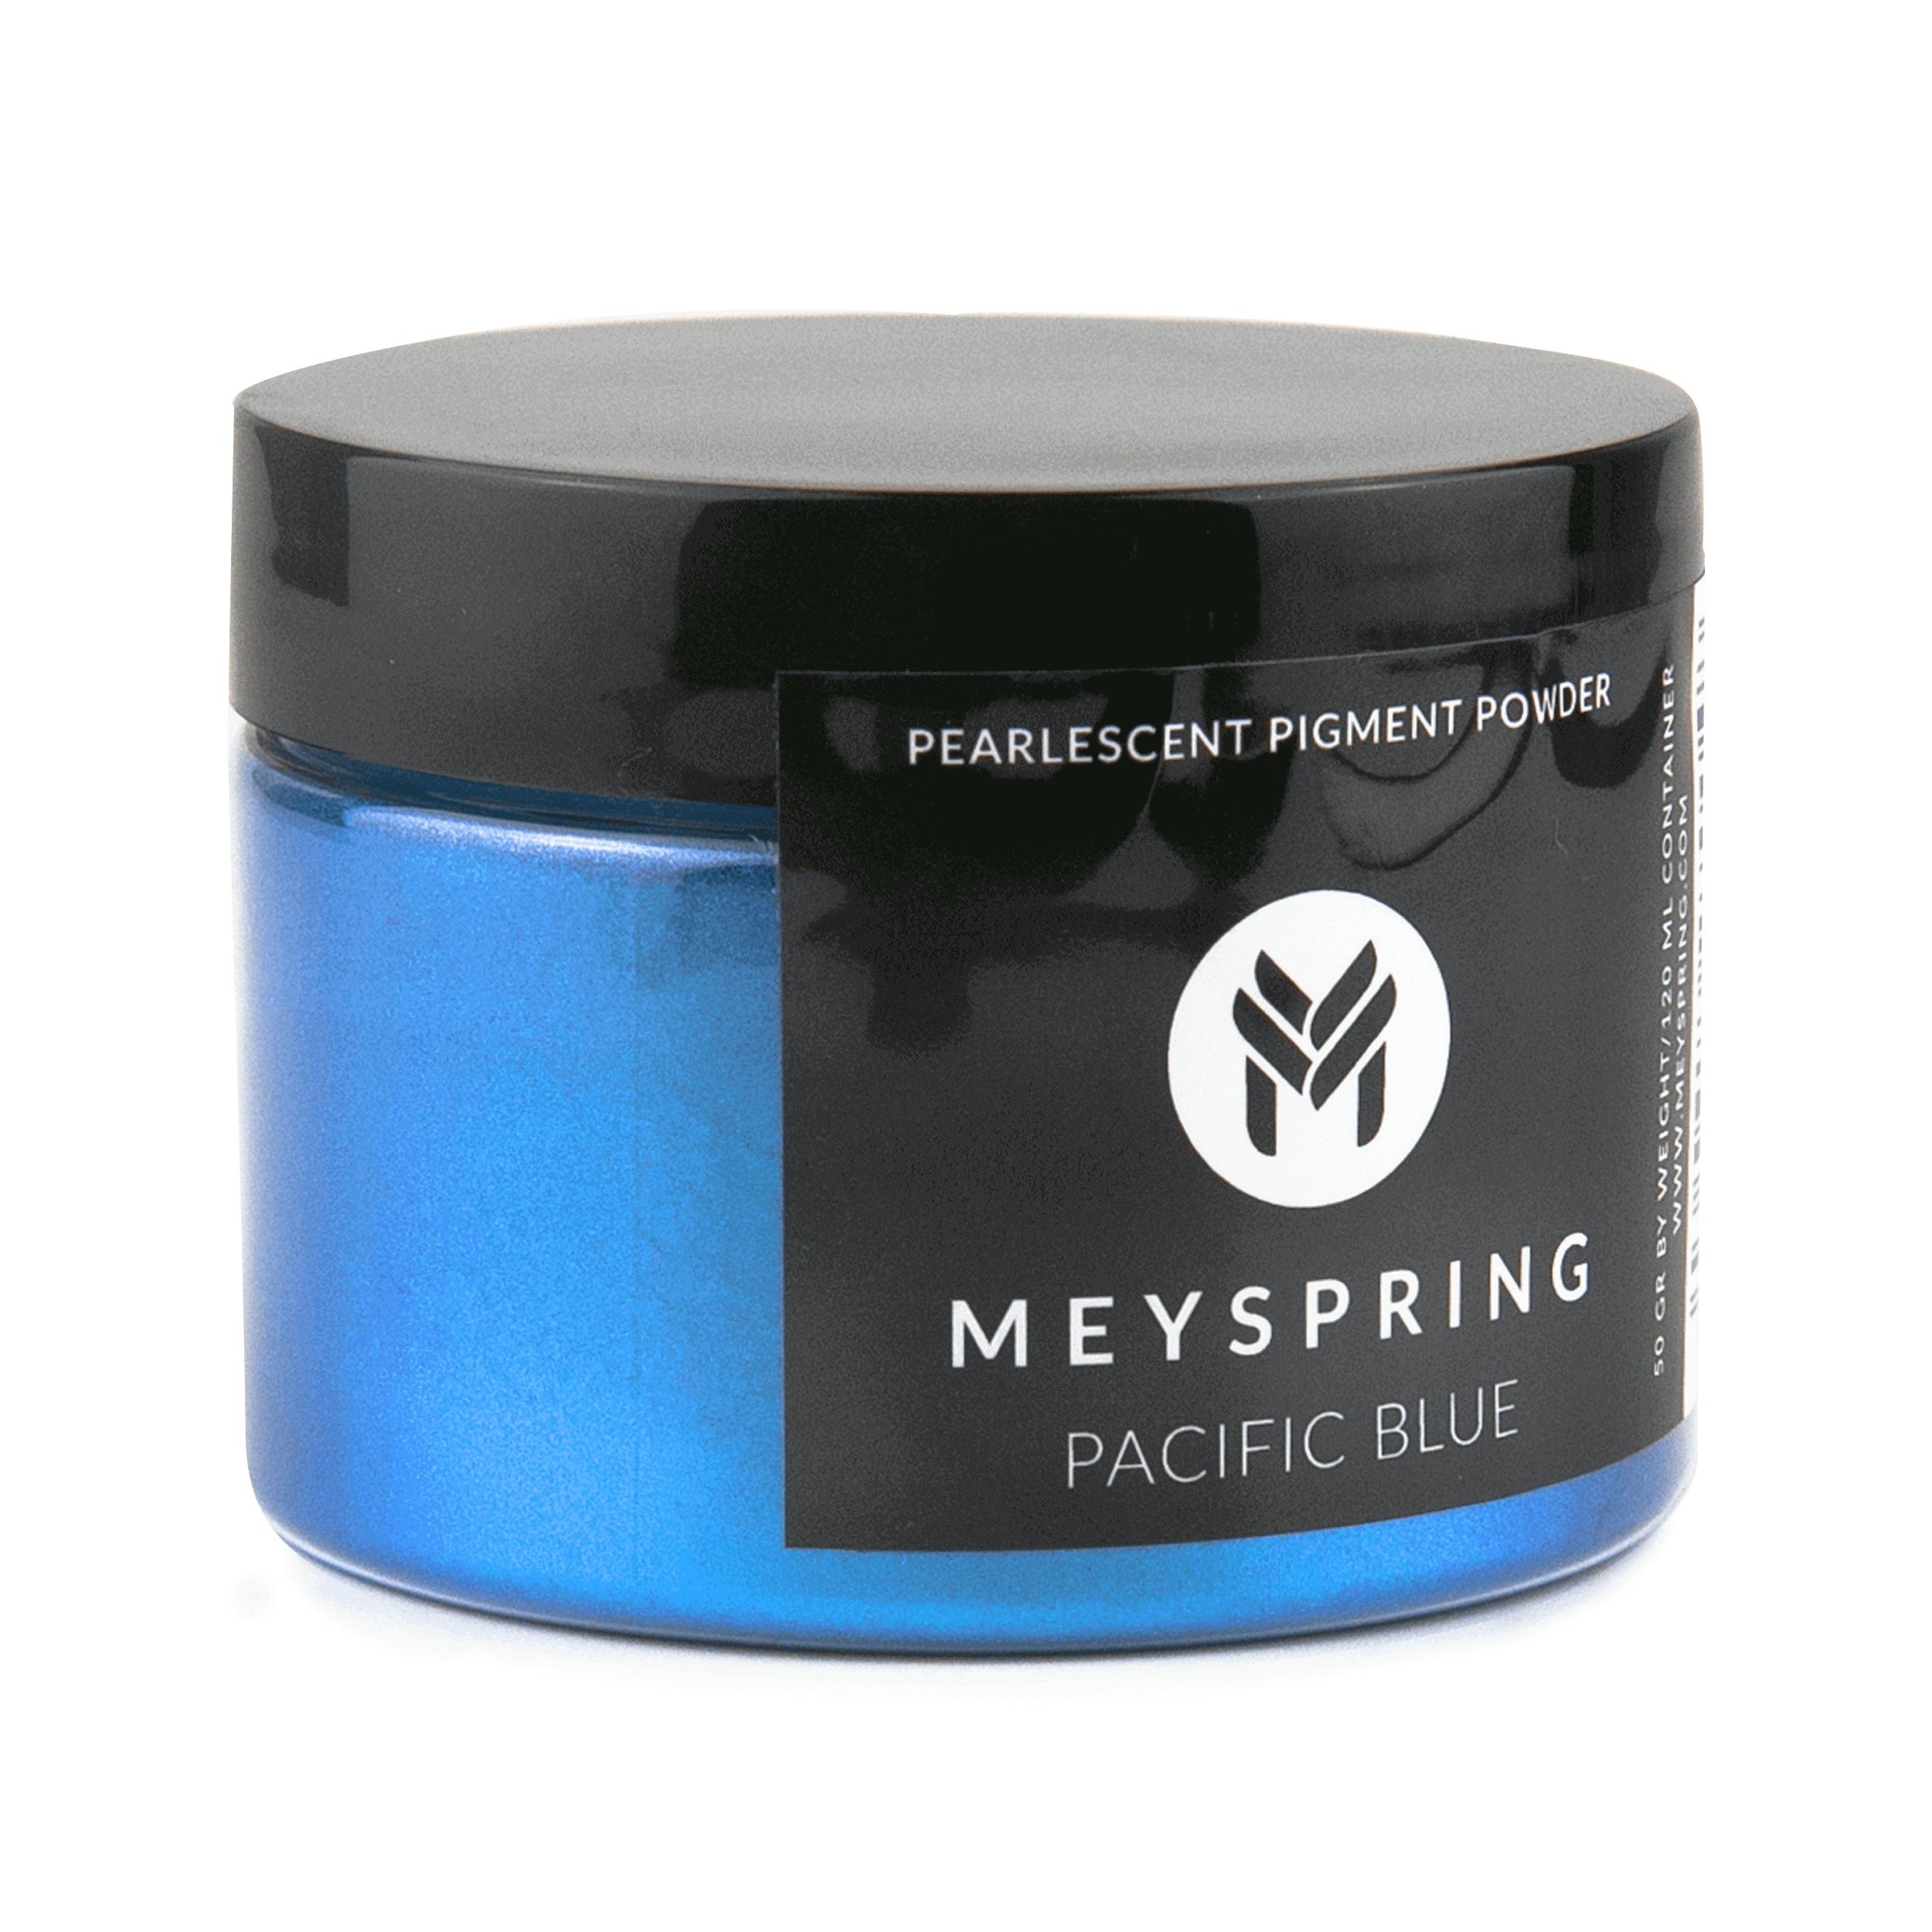 MEYSPRING Pacific Blue Epoxy Resin Color Pigment - 50 Grams - Great for Resin Art, Epoxy Resin, and UV Resin - Mica Powder for Epoxy Resin